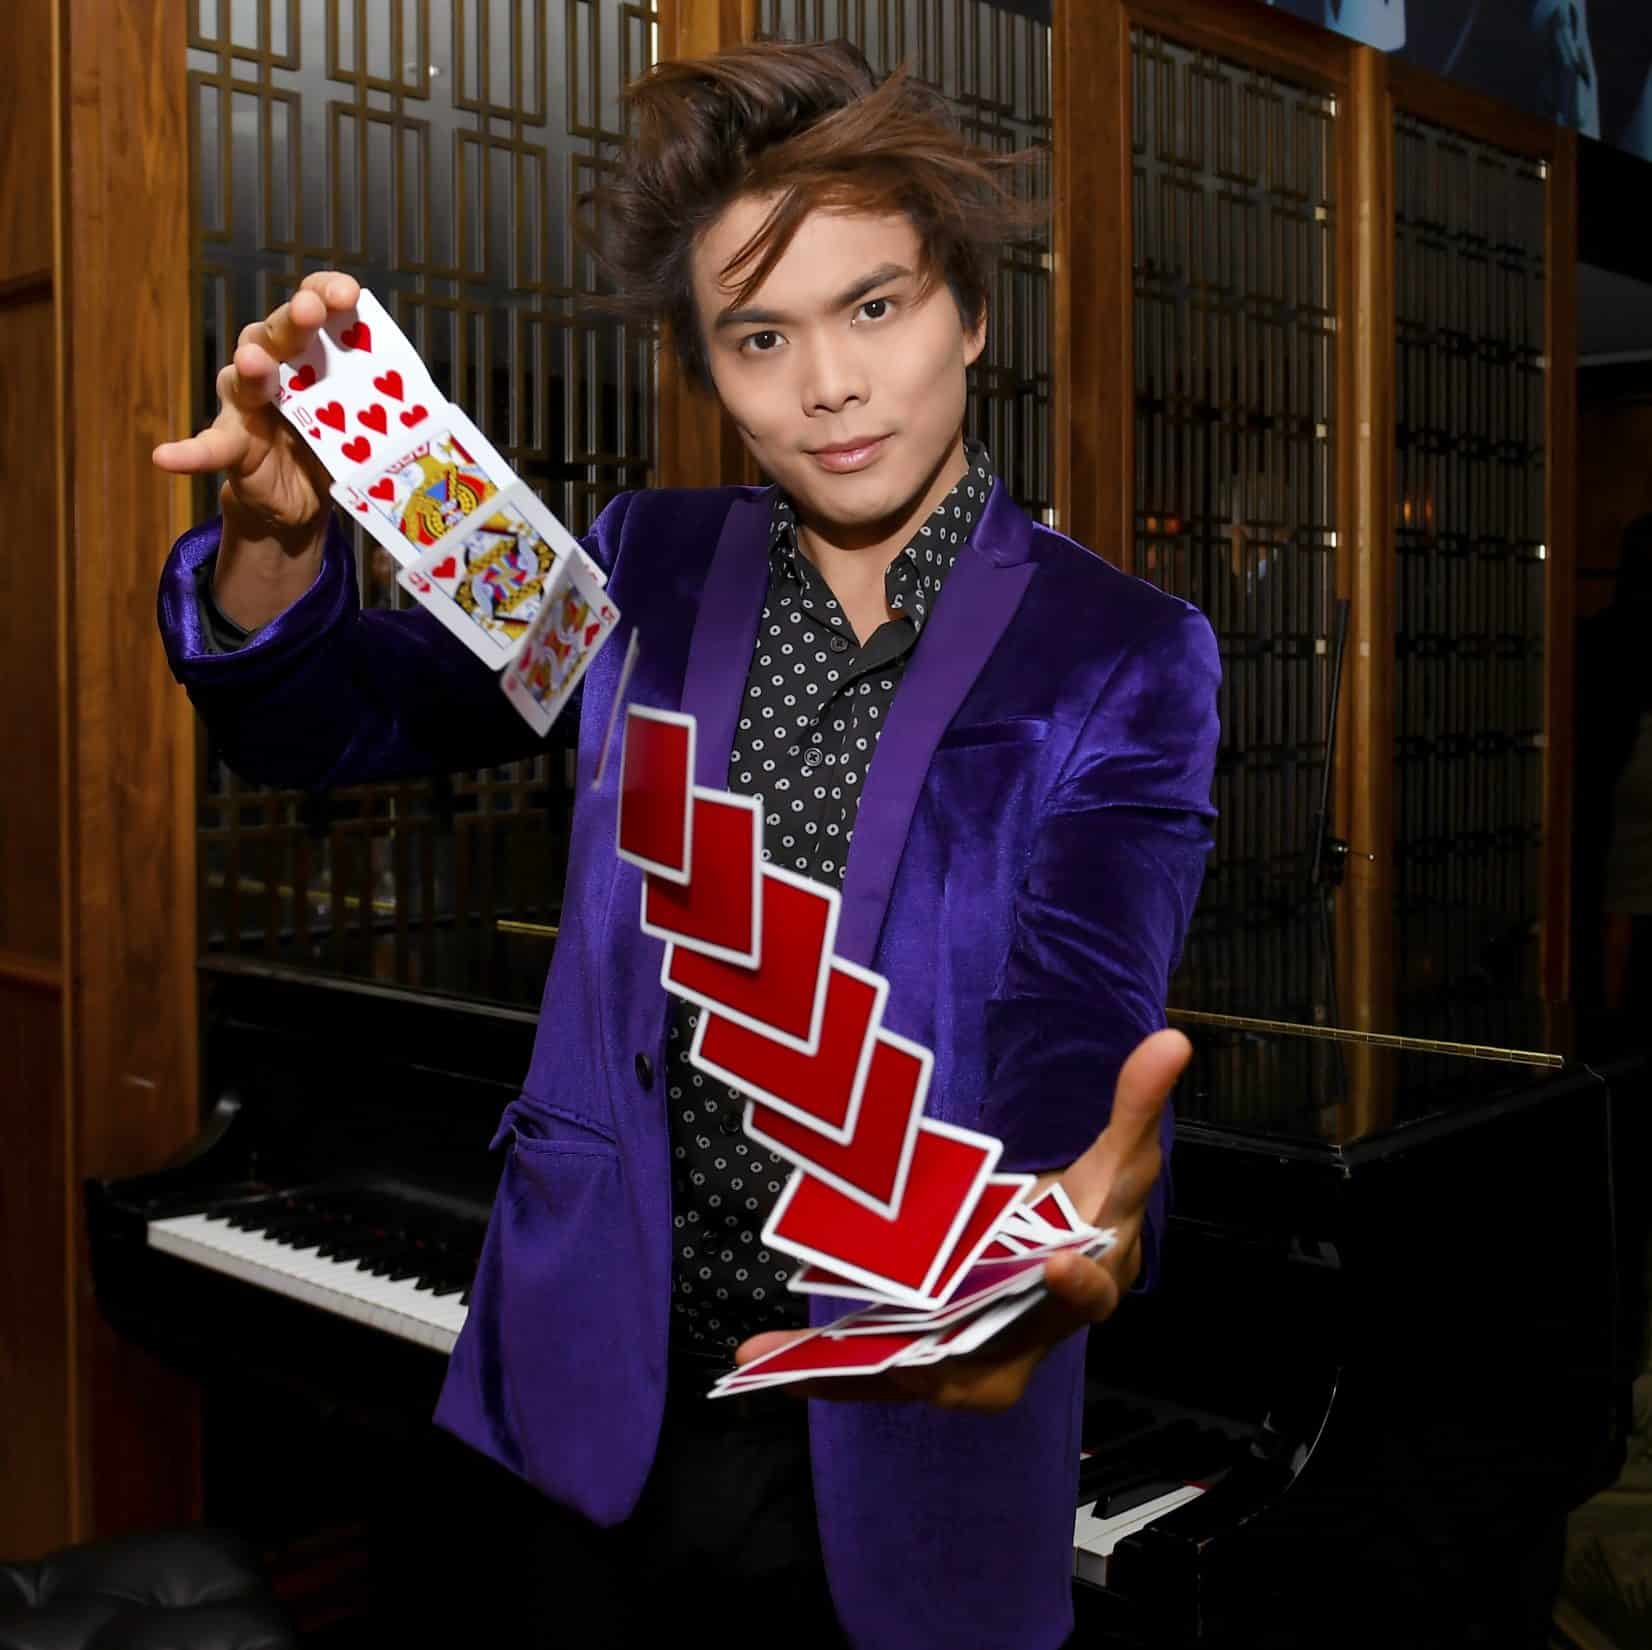 Shin Lim shuffling cards as part of the magic shows on the Strip